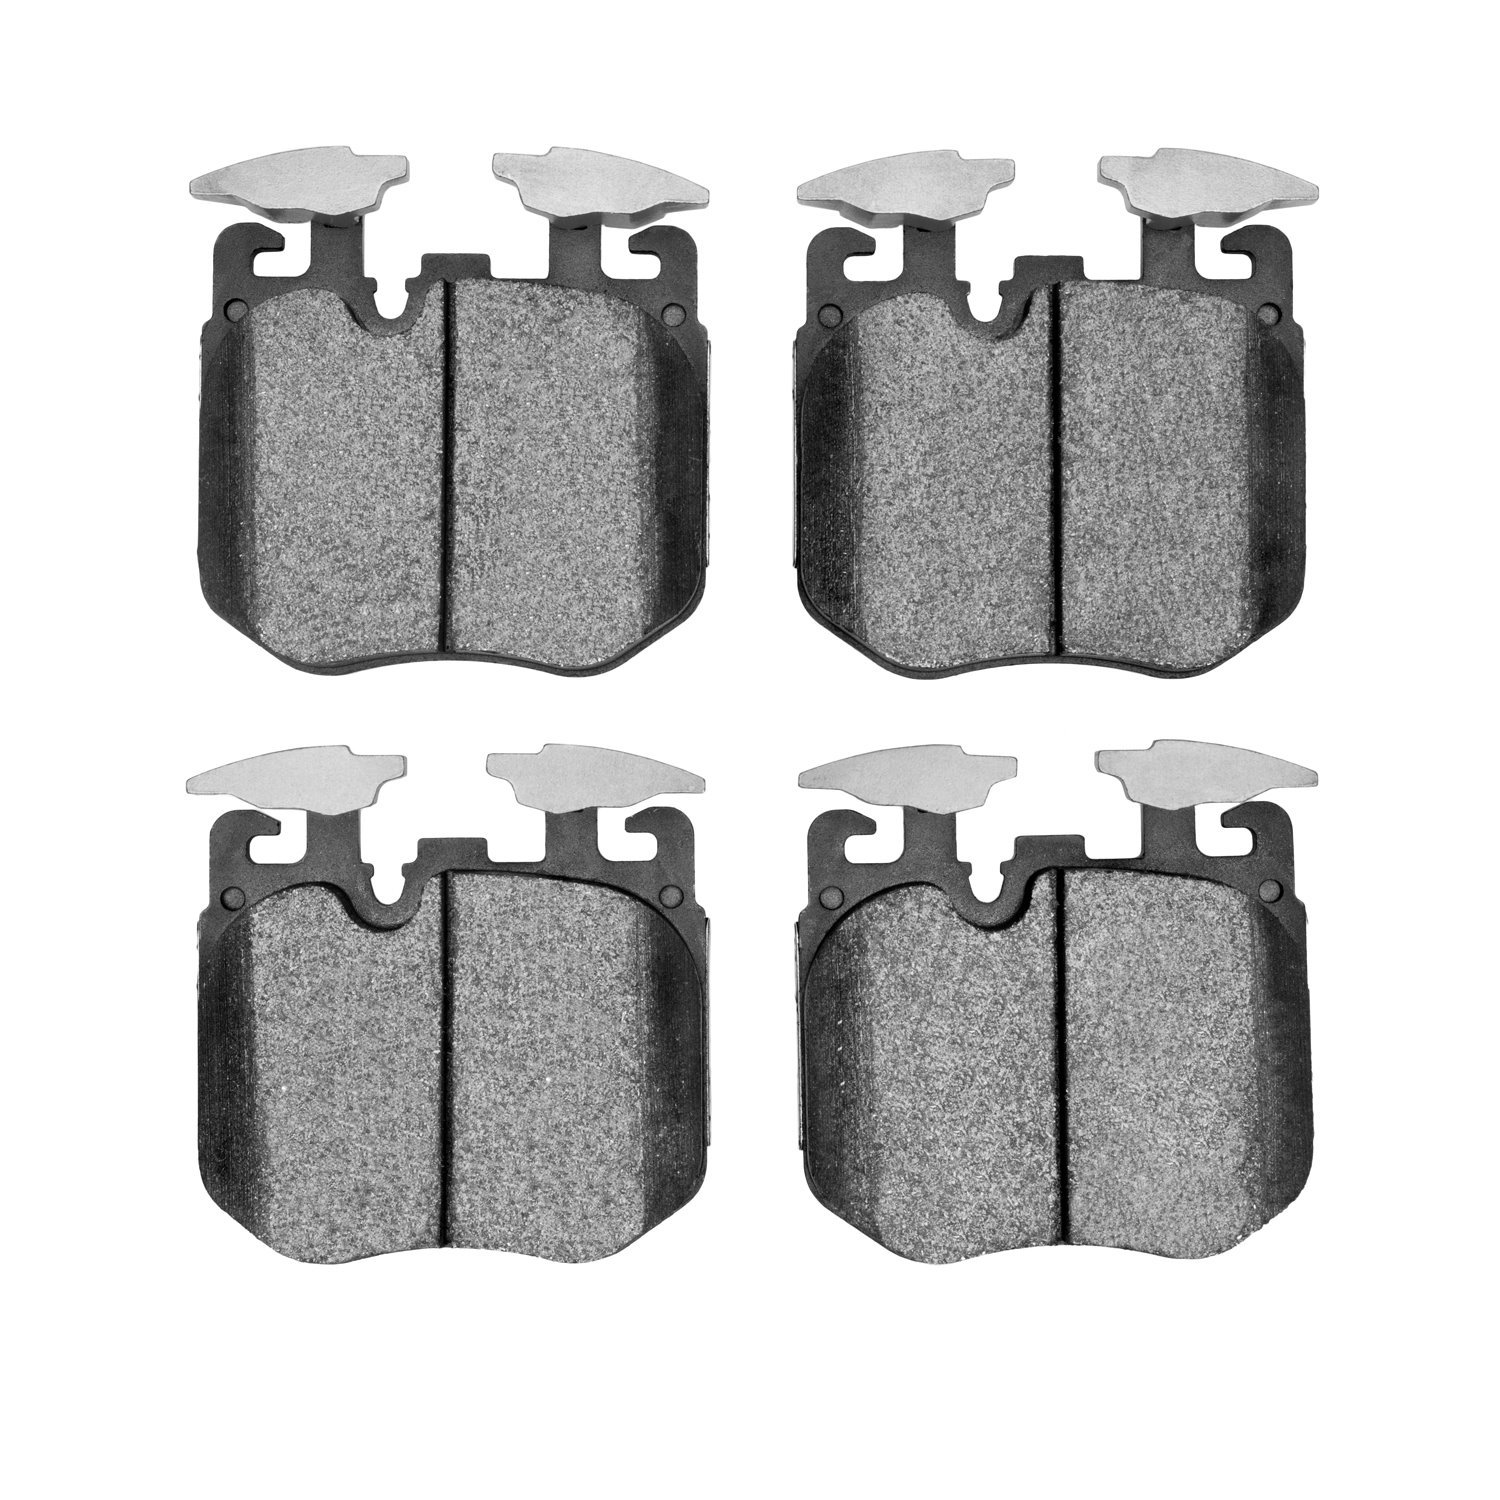 1310-1868-00 3000-Series Ceramic Brake Pads, Fits Select Multiple Makes/Models, Position: Front